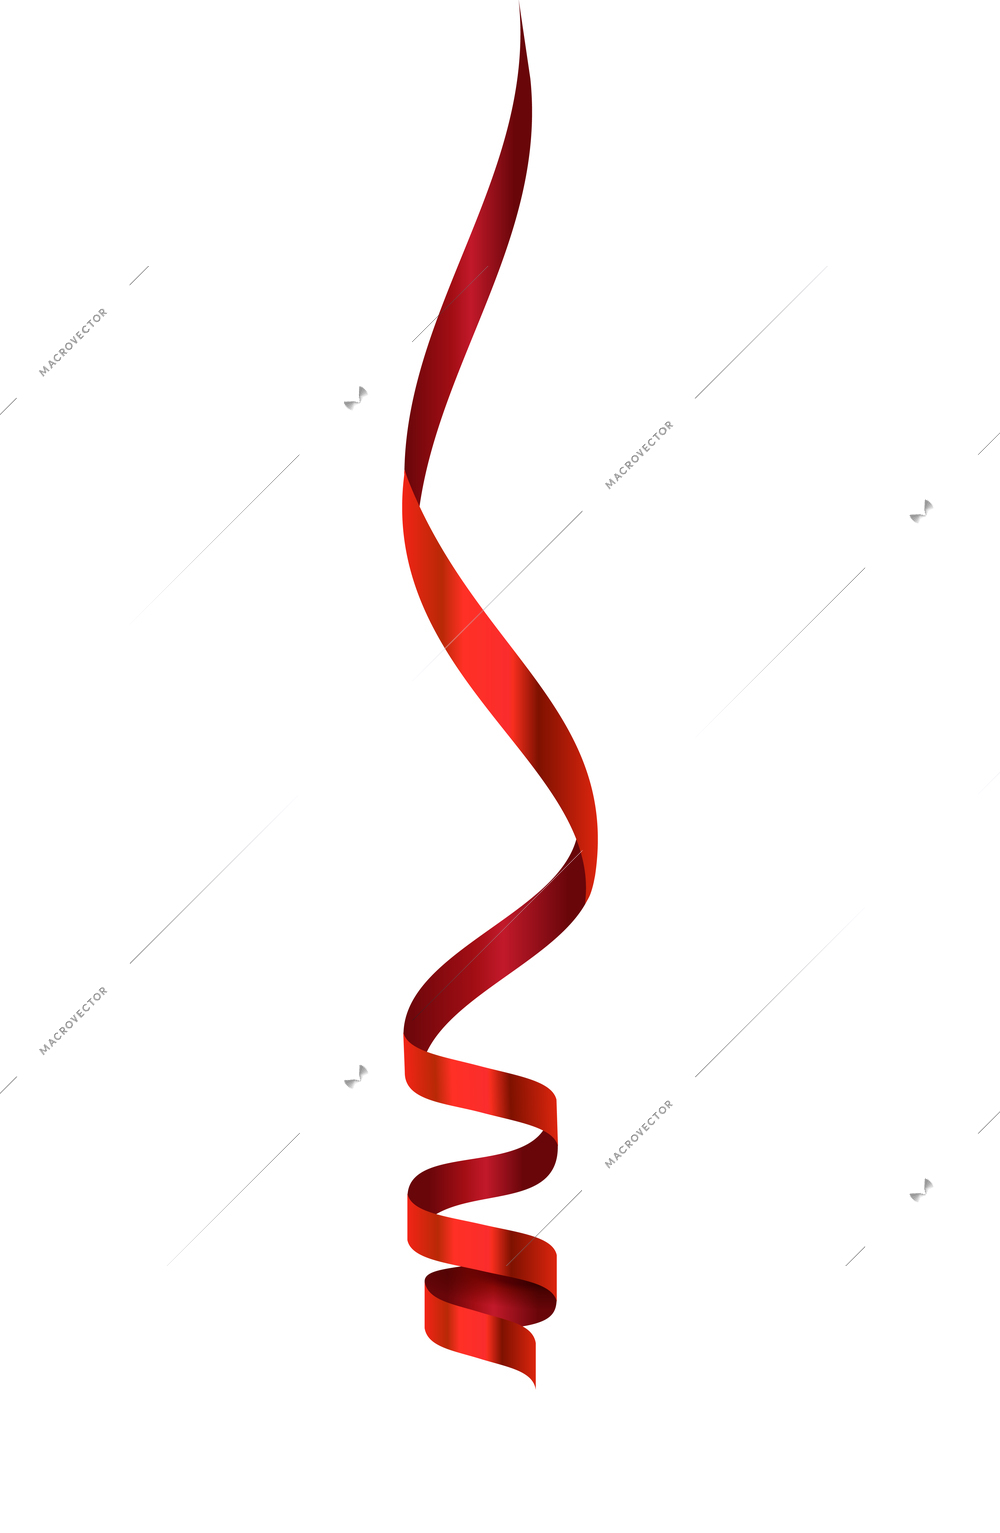 Curled ribbons serpentine realistic composition with isolated image of shiny festive decoration vector illustration